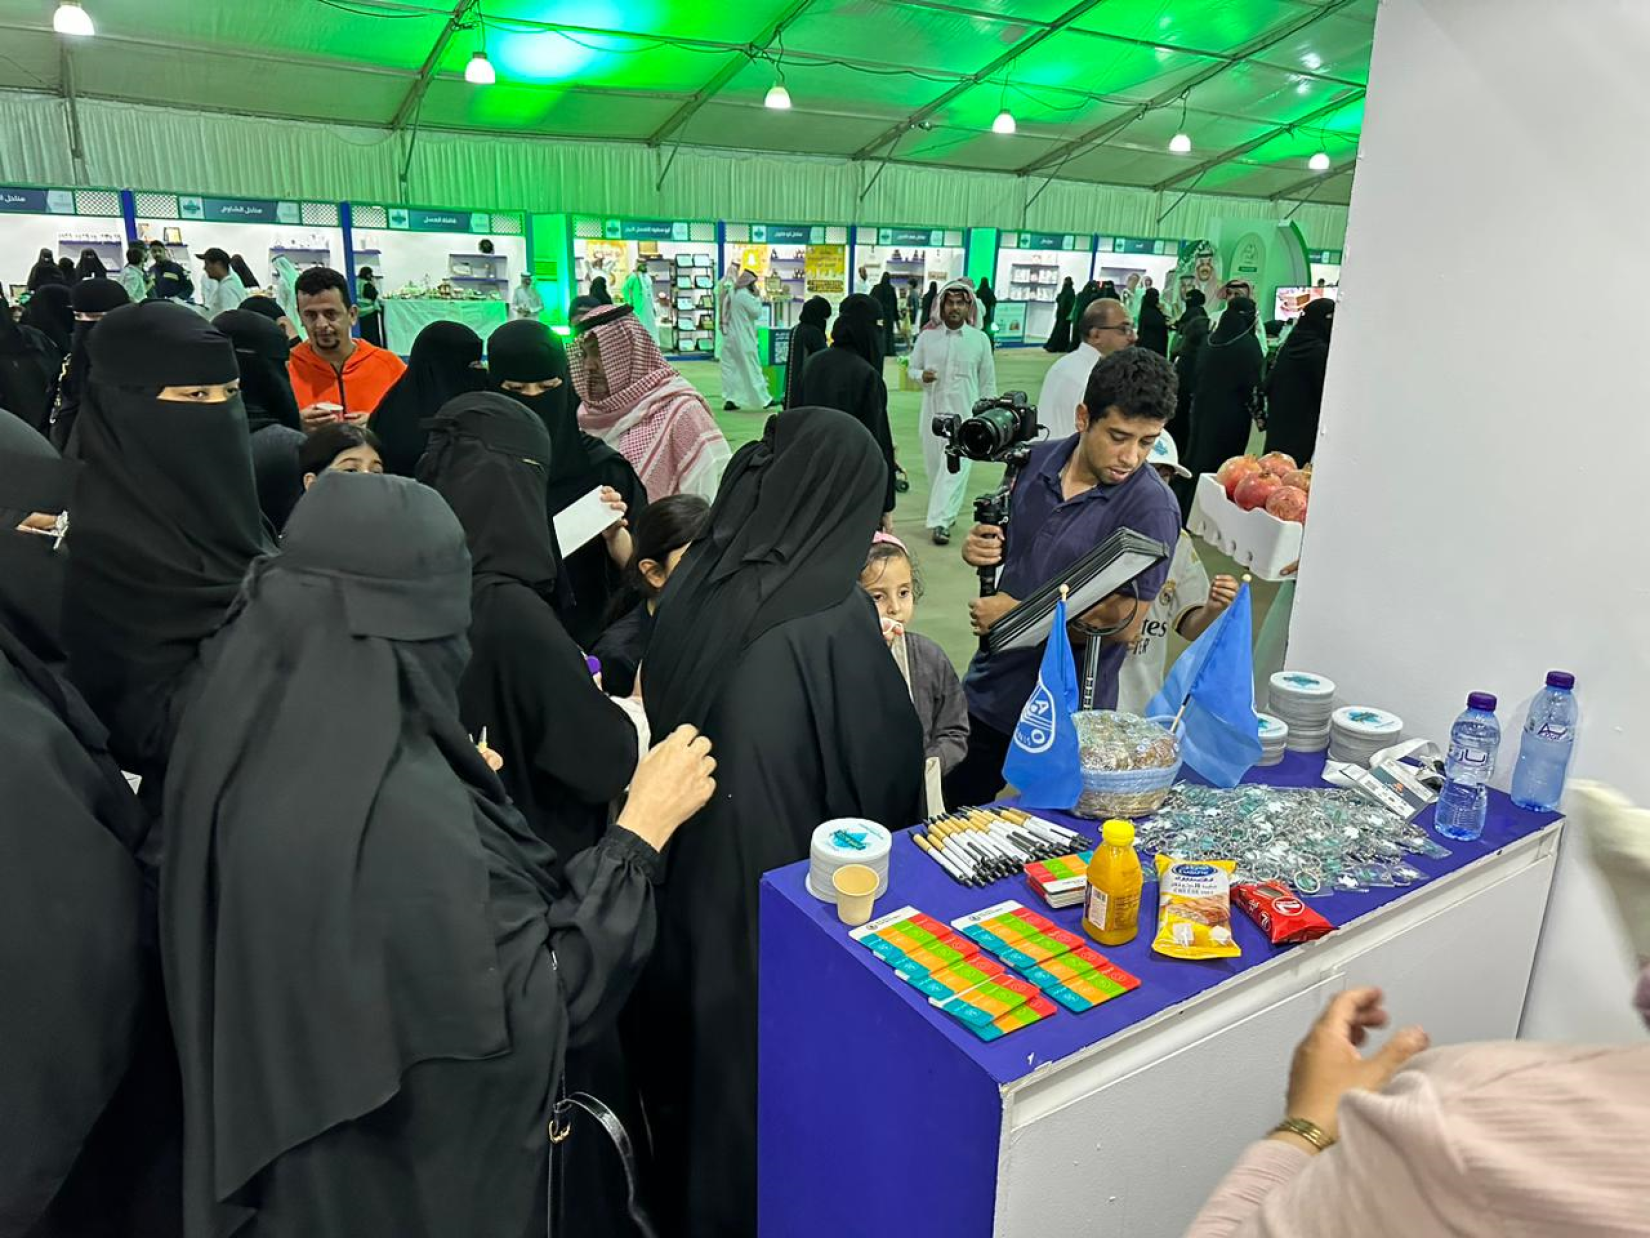 People learning about FAO Booth at the World Food Day Celebrations in Saudi Arabia